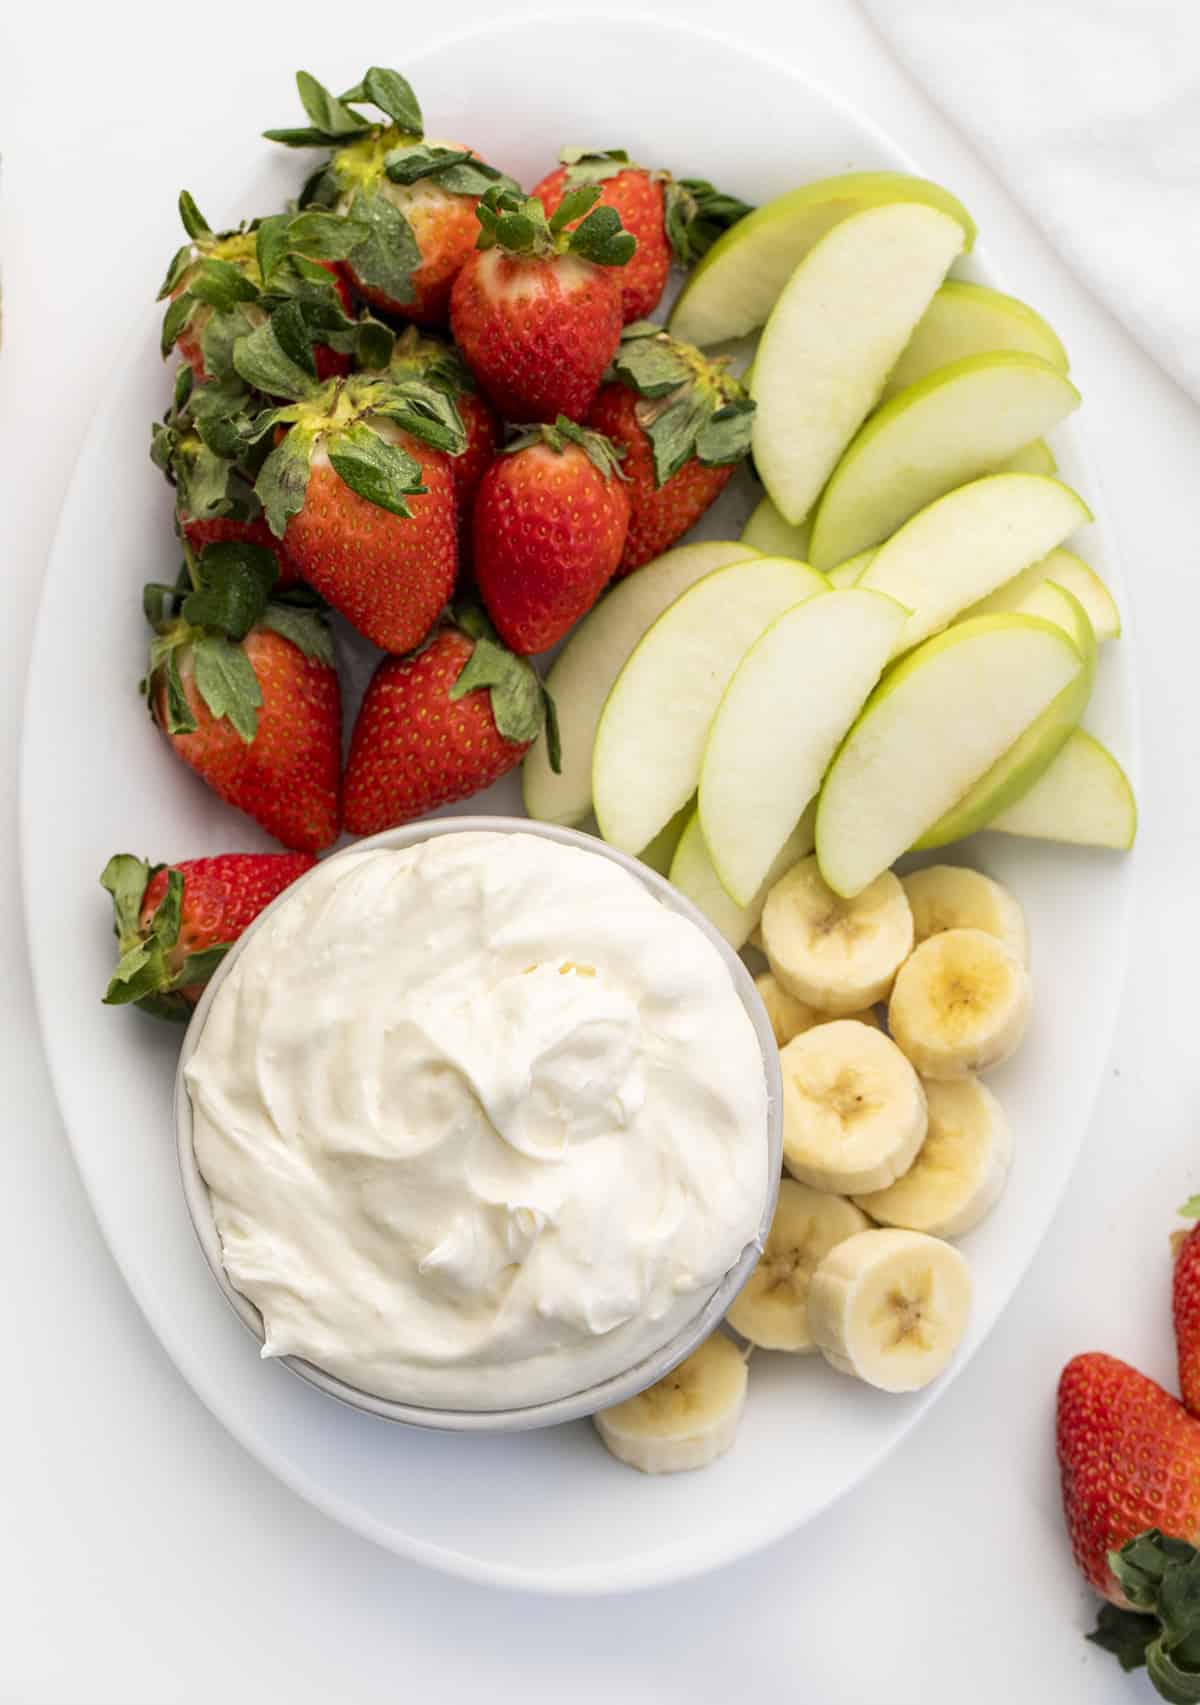 Plate of Easy Fruit Dip with Apples, Bananas, and Strawberries.